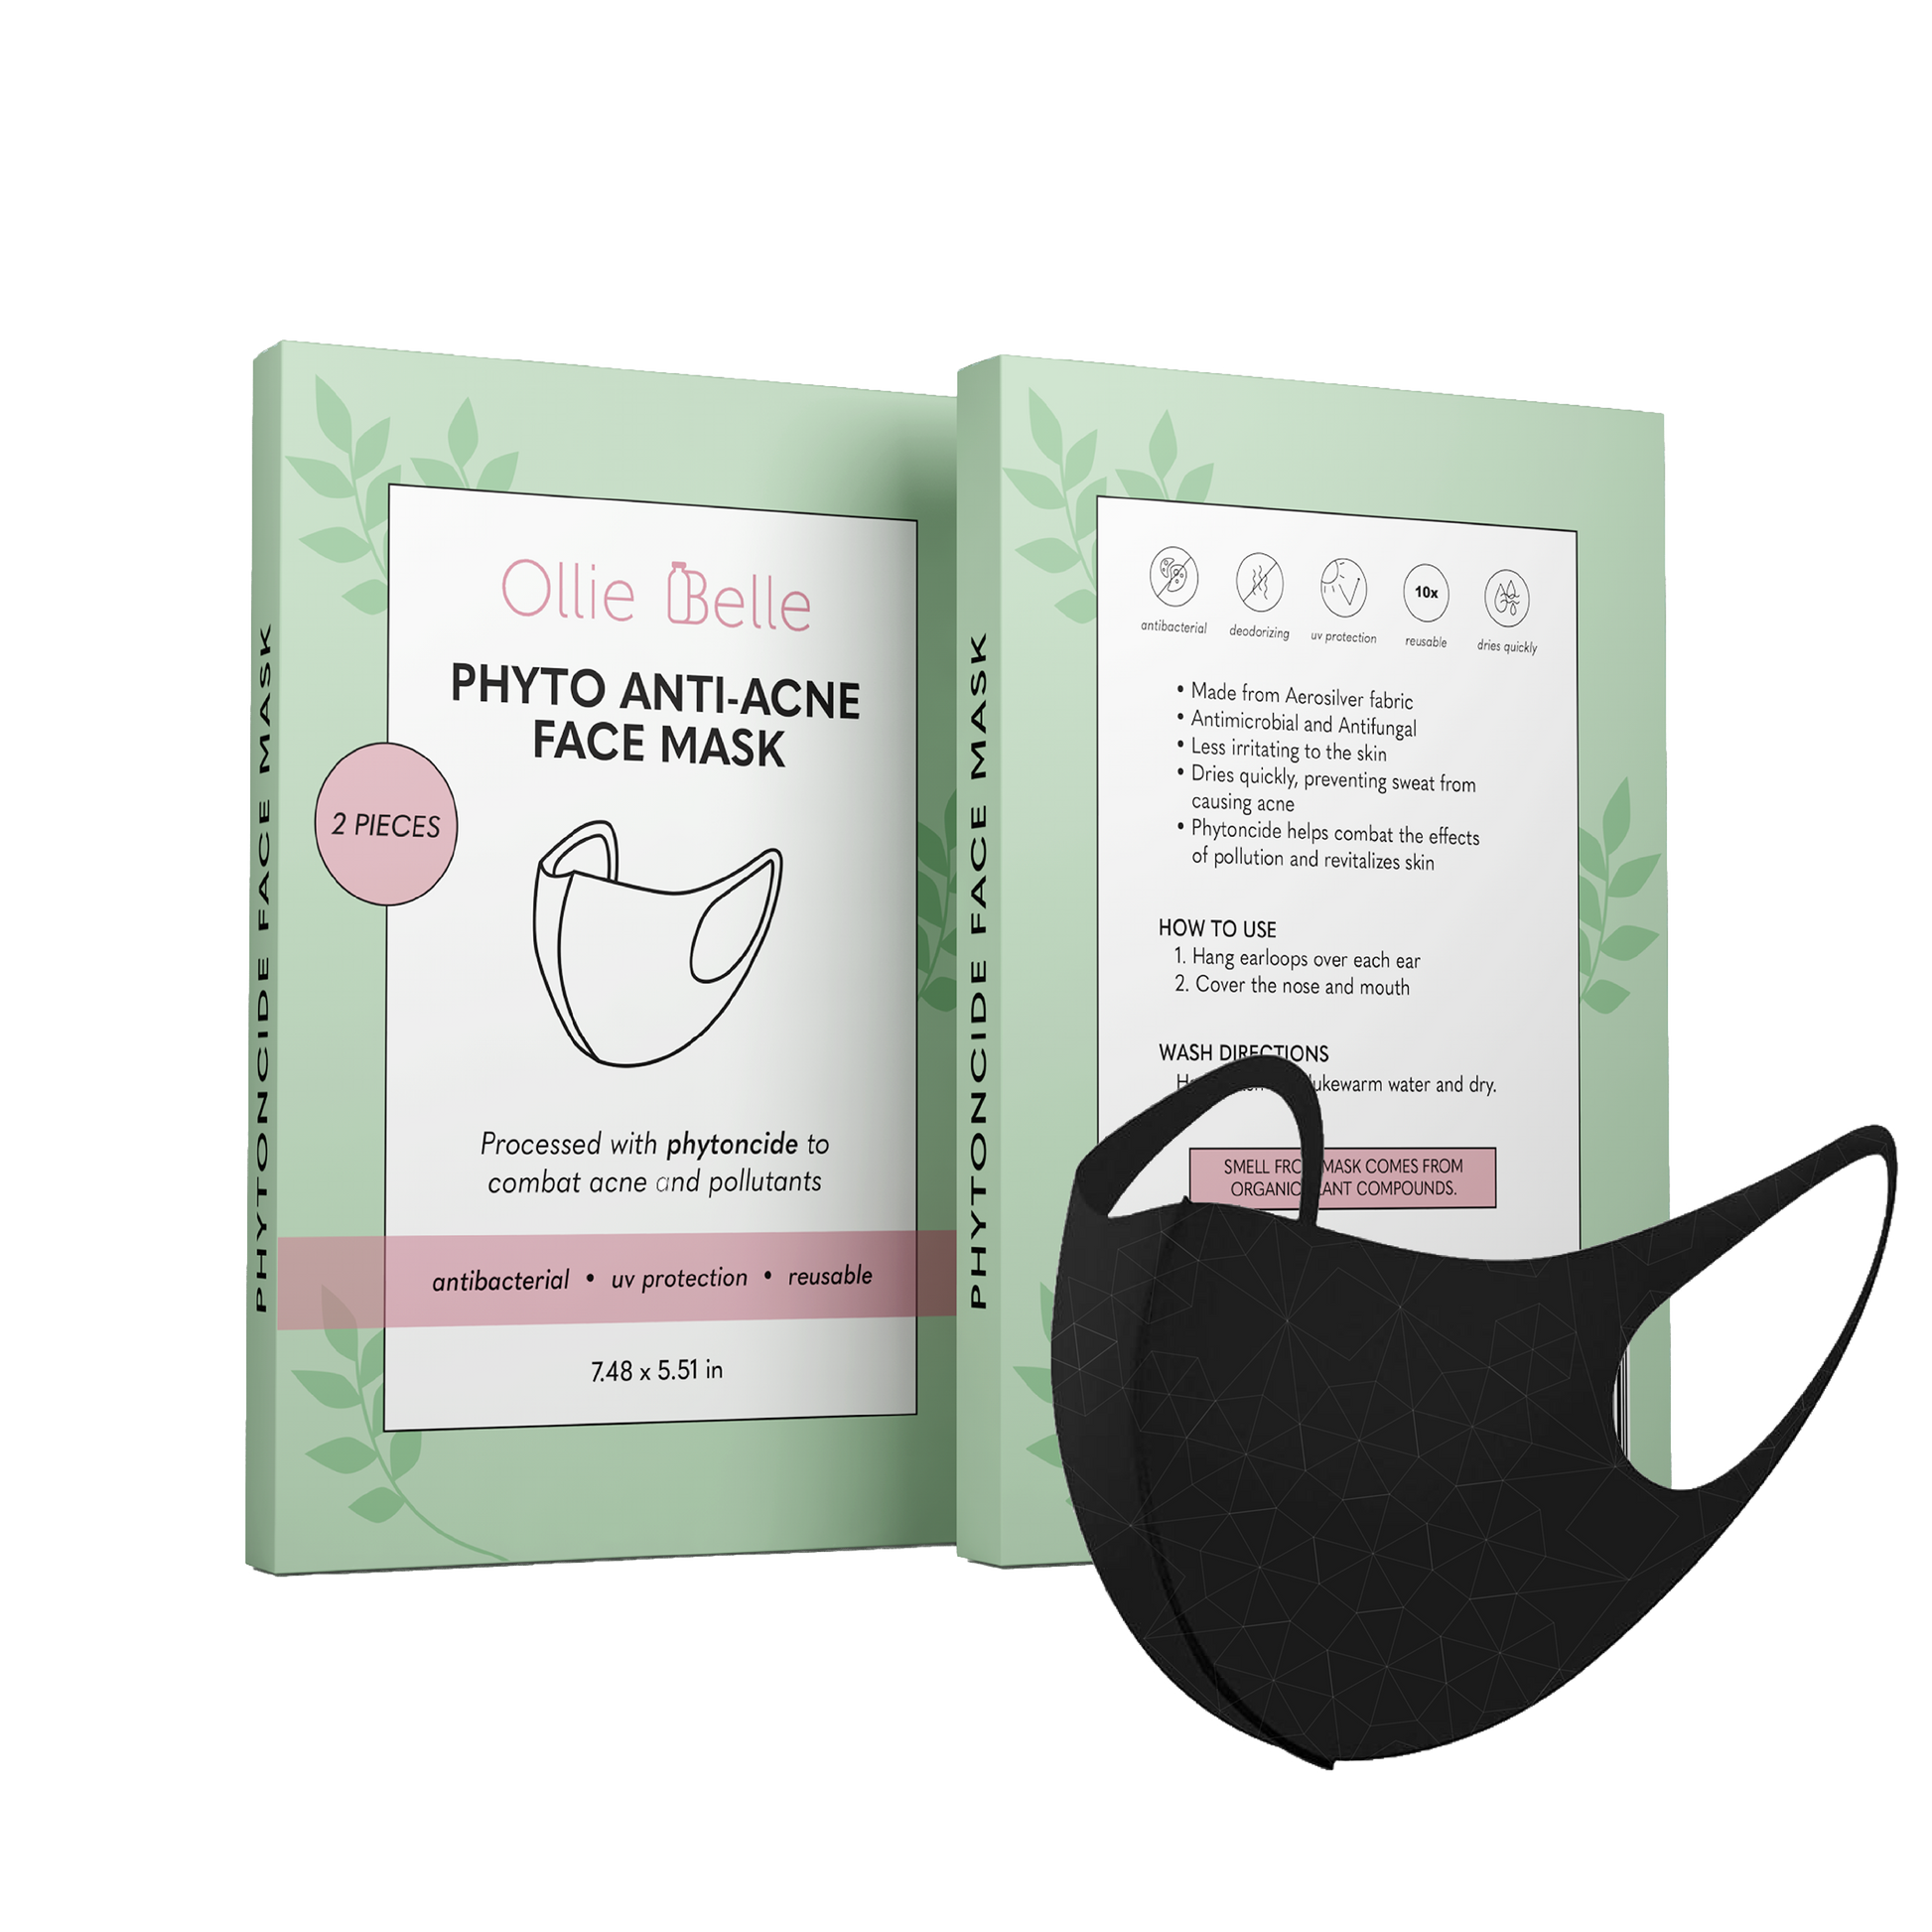 ollie belle phyto anti-acne face mask black